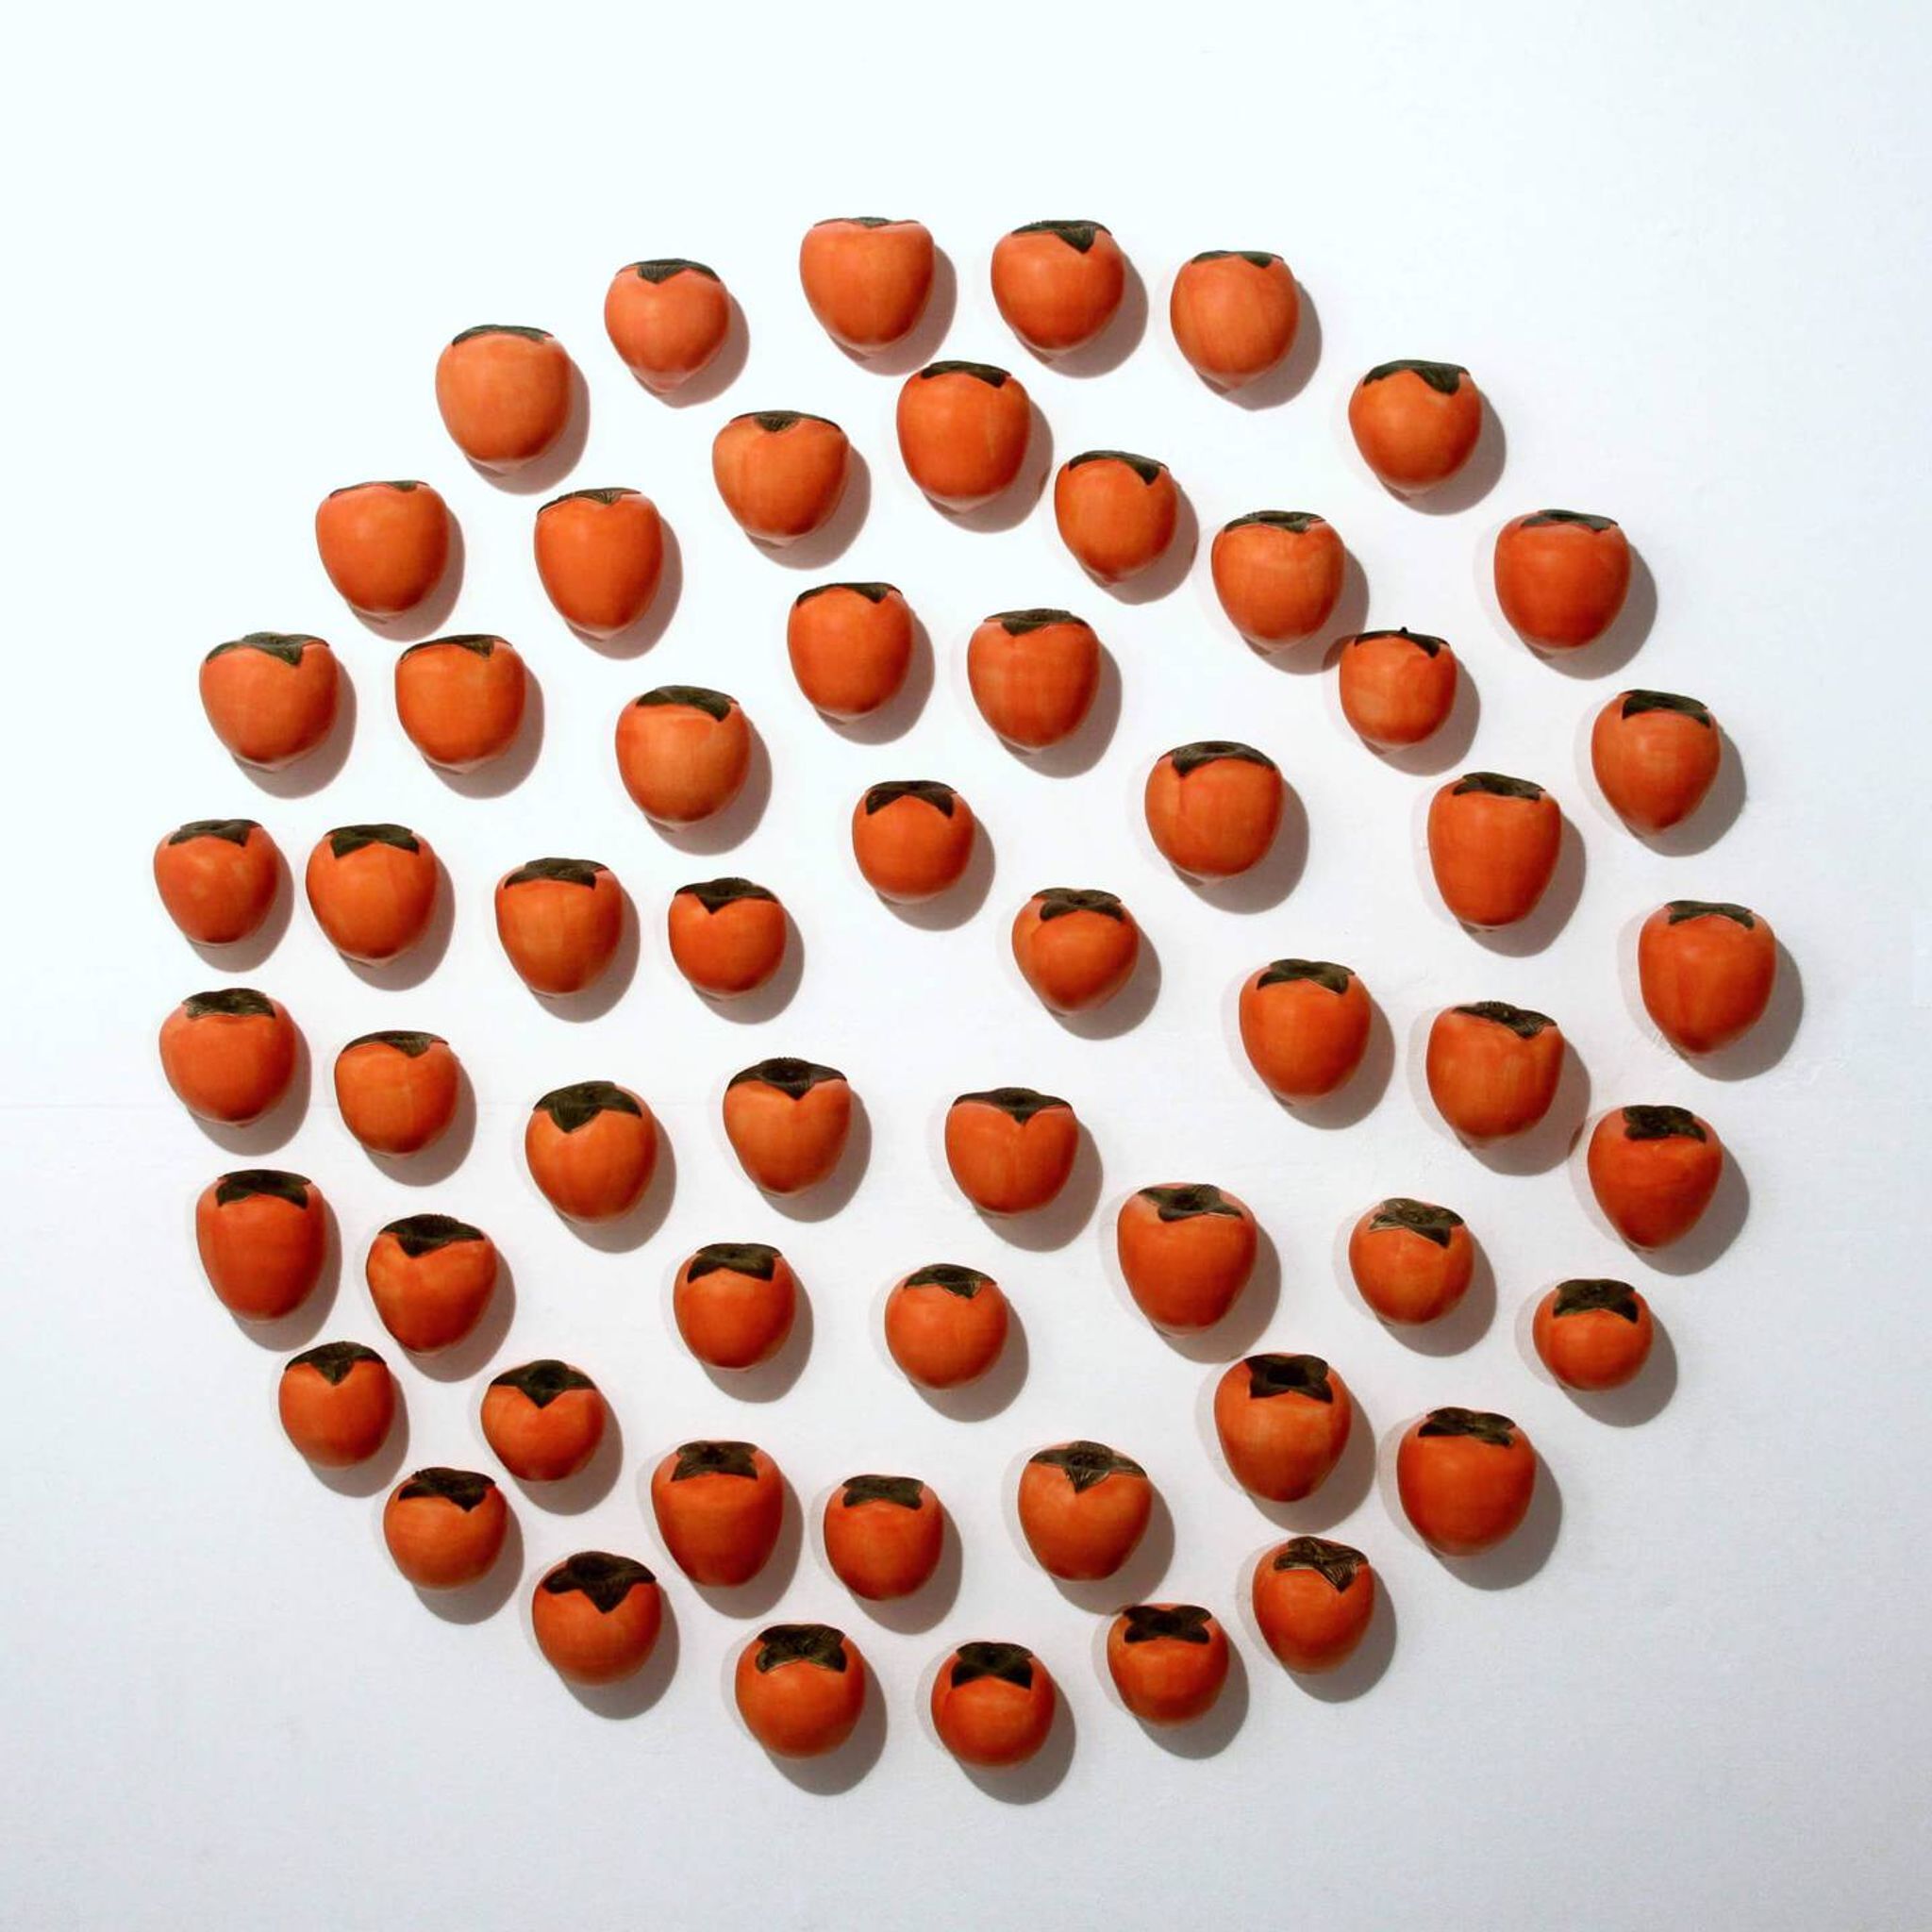 An art piece by Juliane Shibata made of many artificial persimmons constructed in a circle.